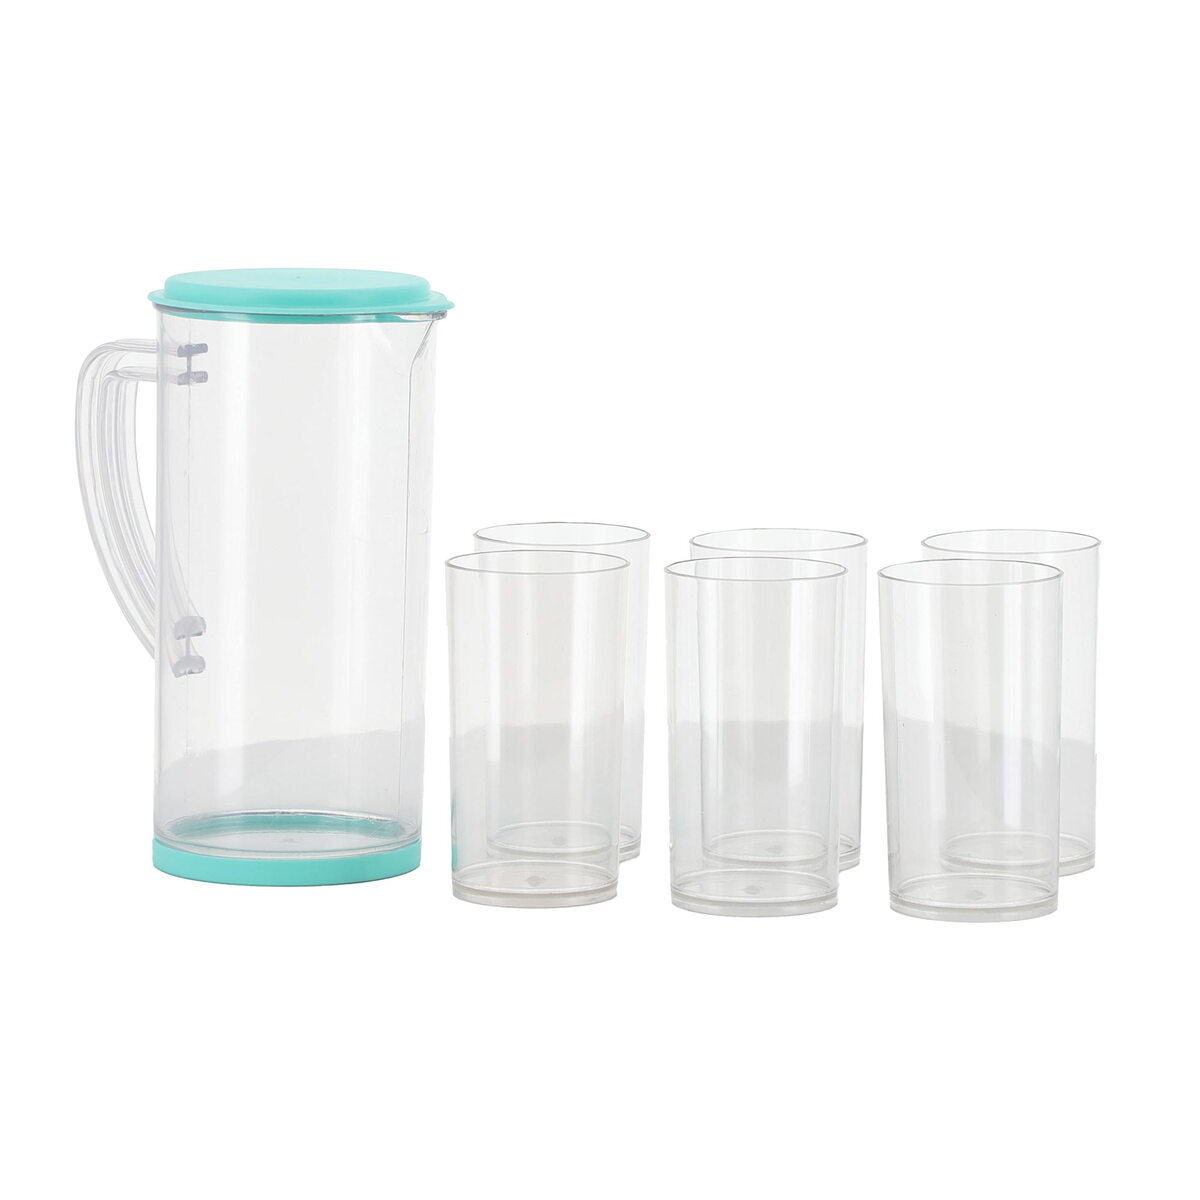 Home Plastic Water Set 7pc